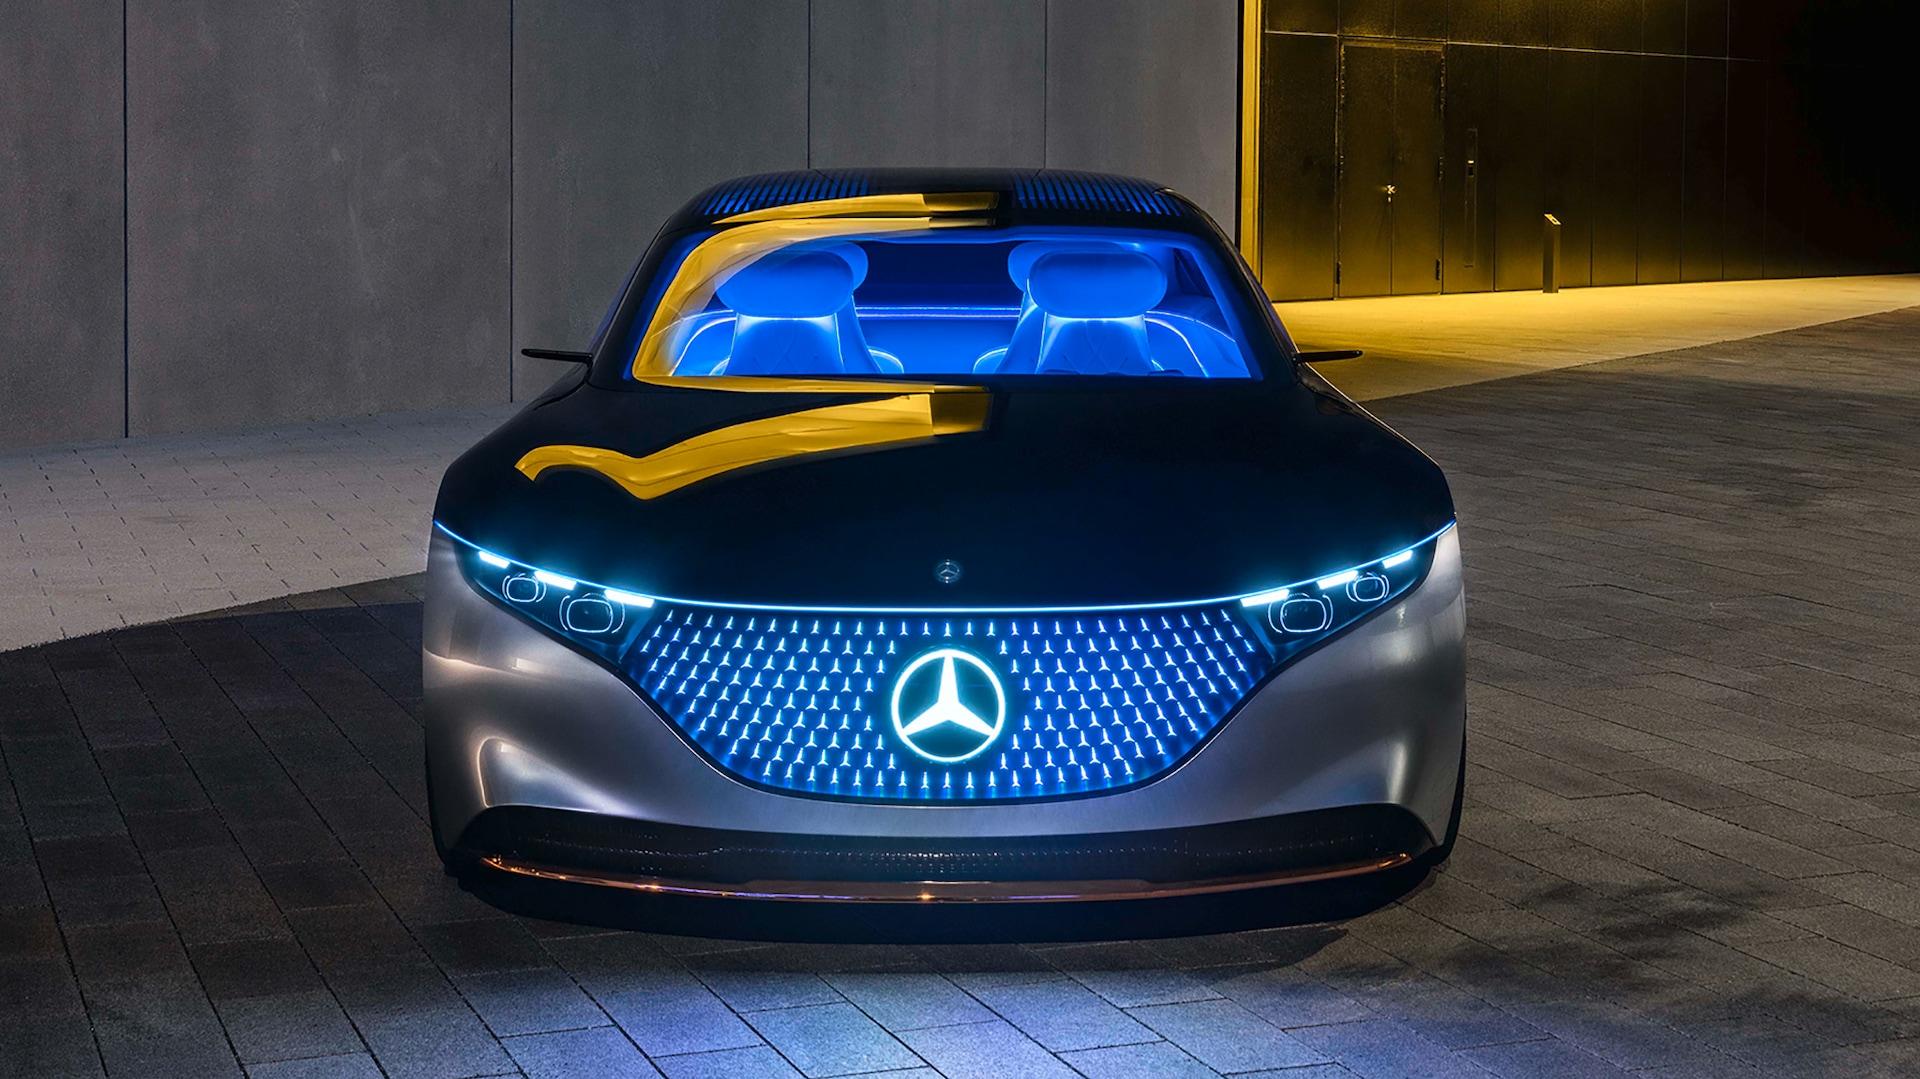 How Could Mercedes Turn The Hot Vision Eqs Into Dull Ev